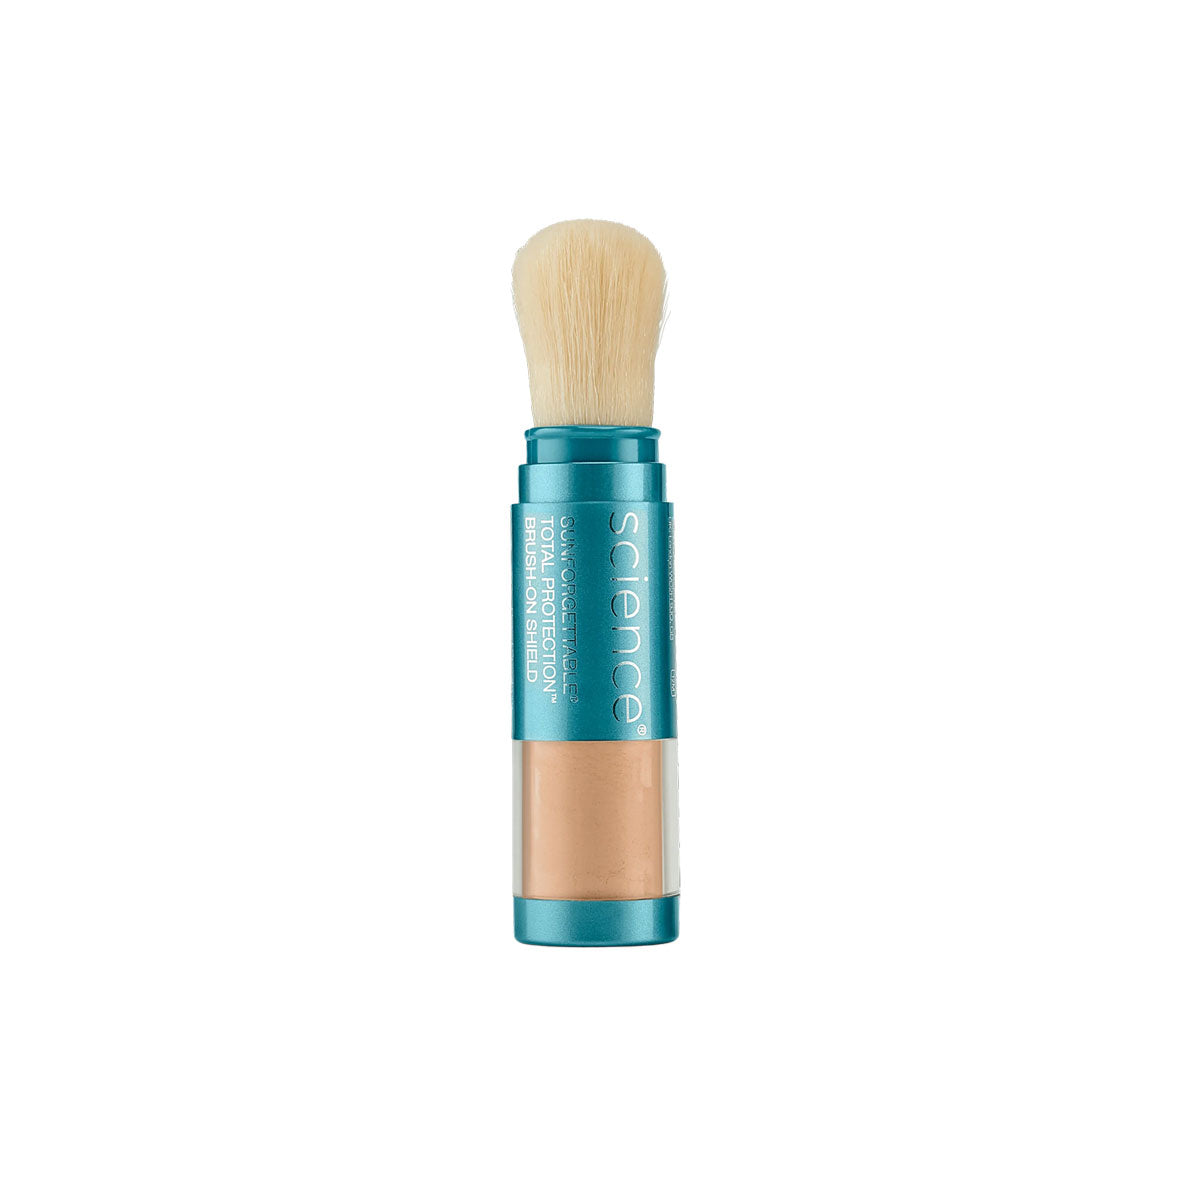 colorescience Products Sunforgettable Total Protection Brush-on Shield SPF 50 medium